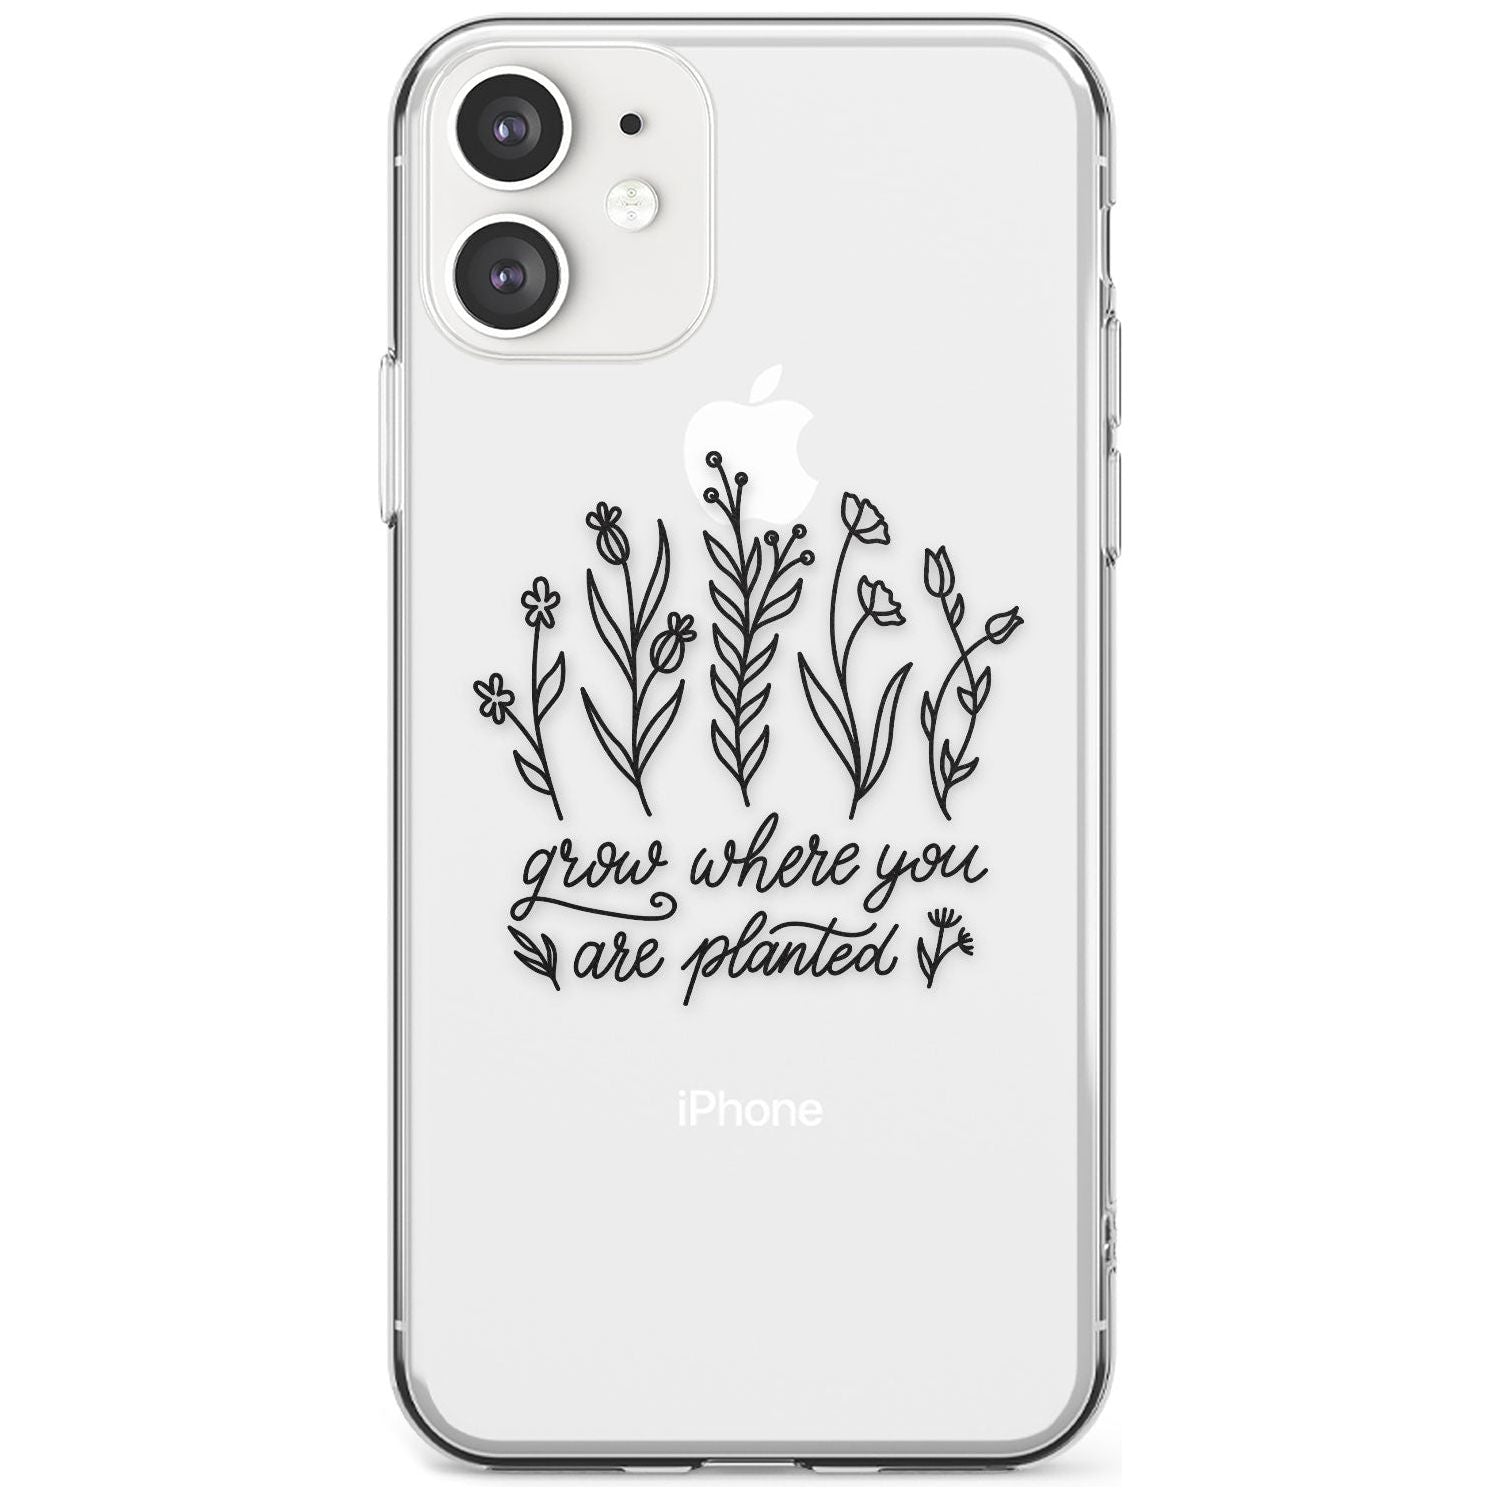 Grow where you are planted Slim TPU Phone Case for iPhone 11